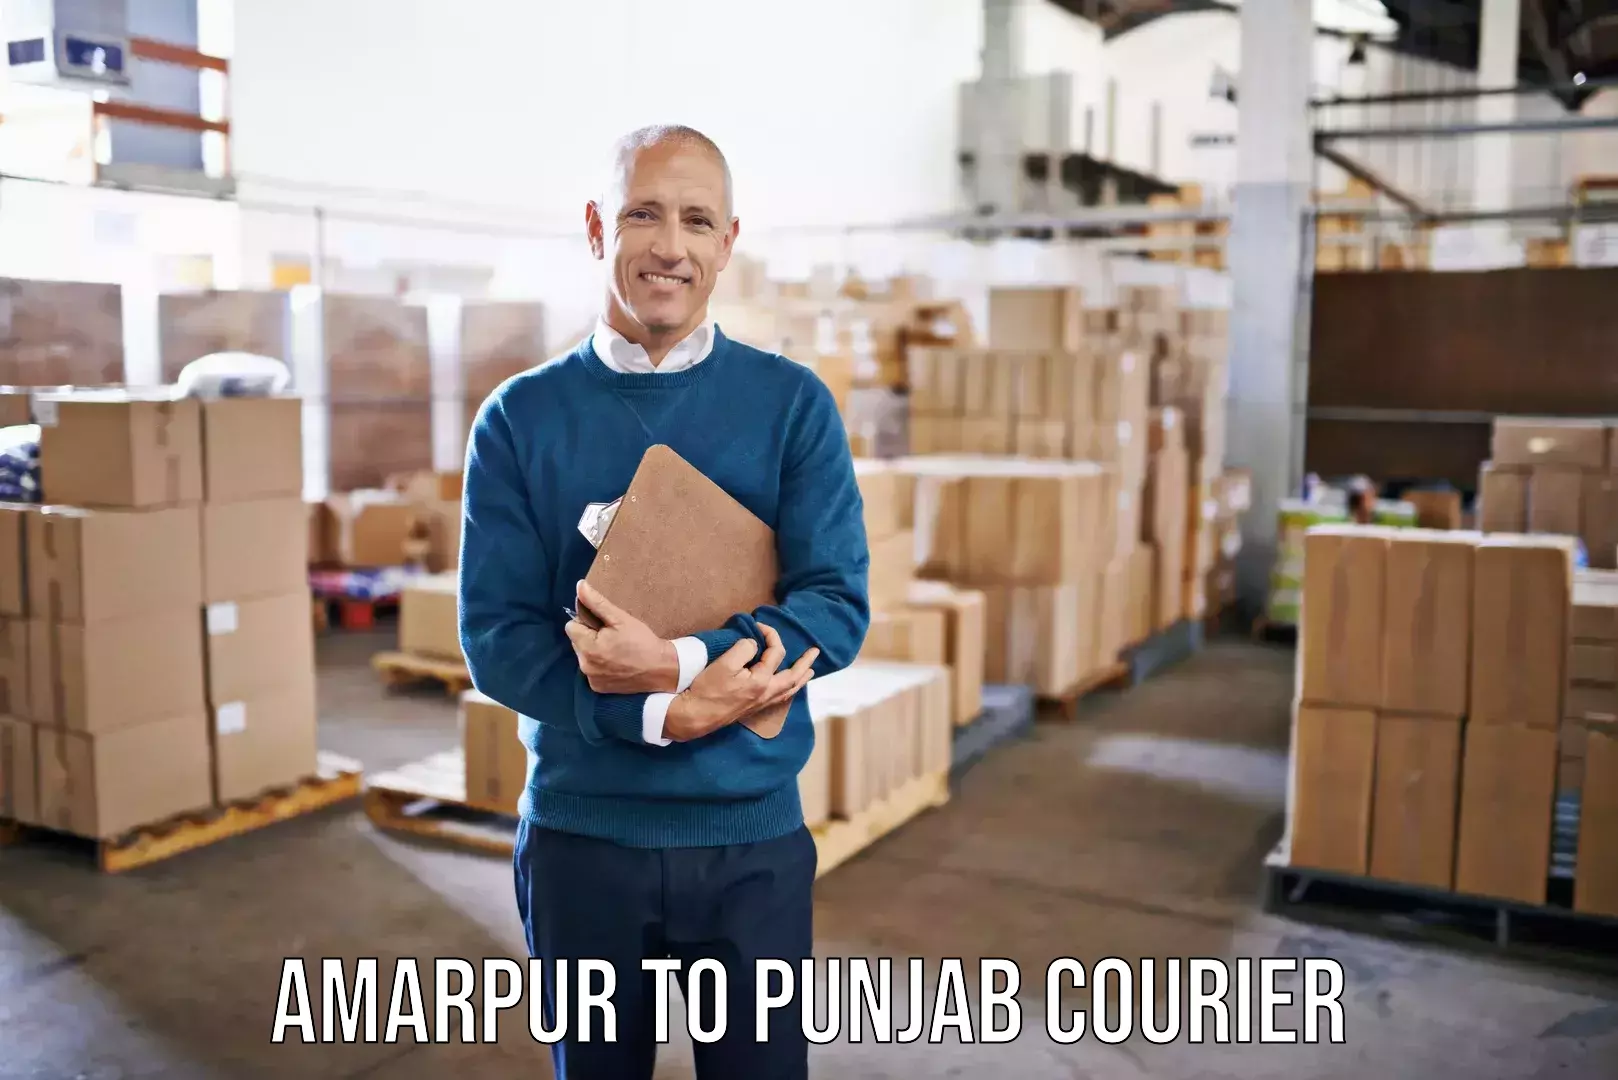 Hassle-free relocation Amarpur to Mohali